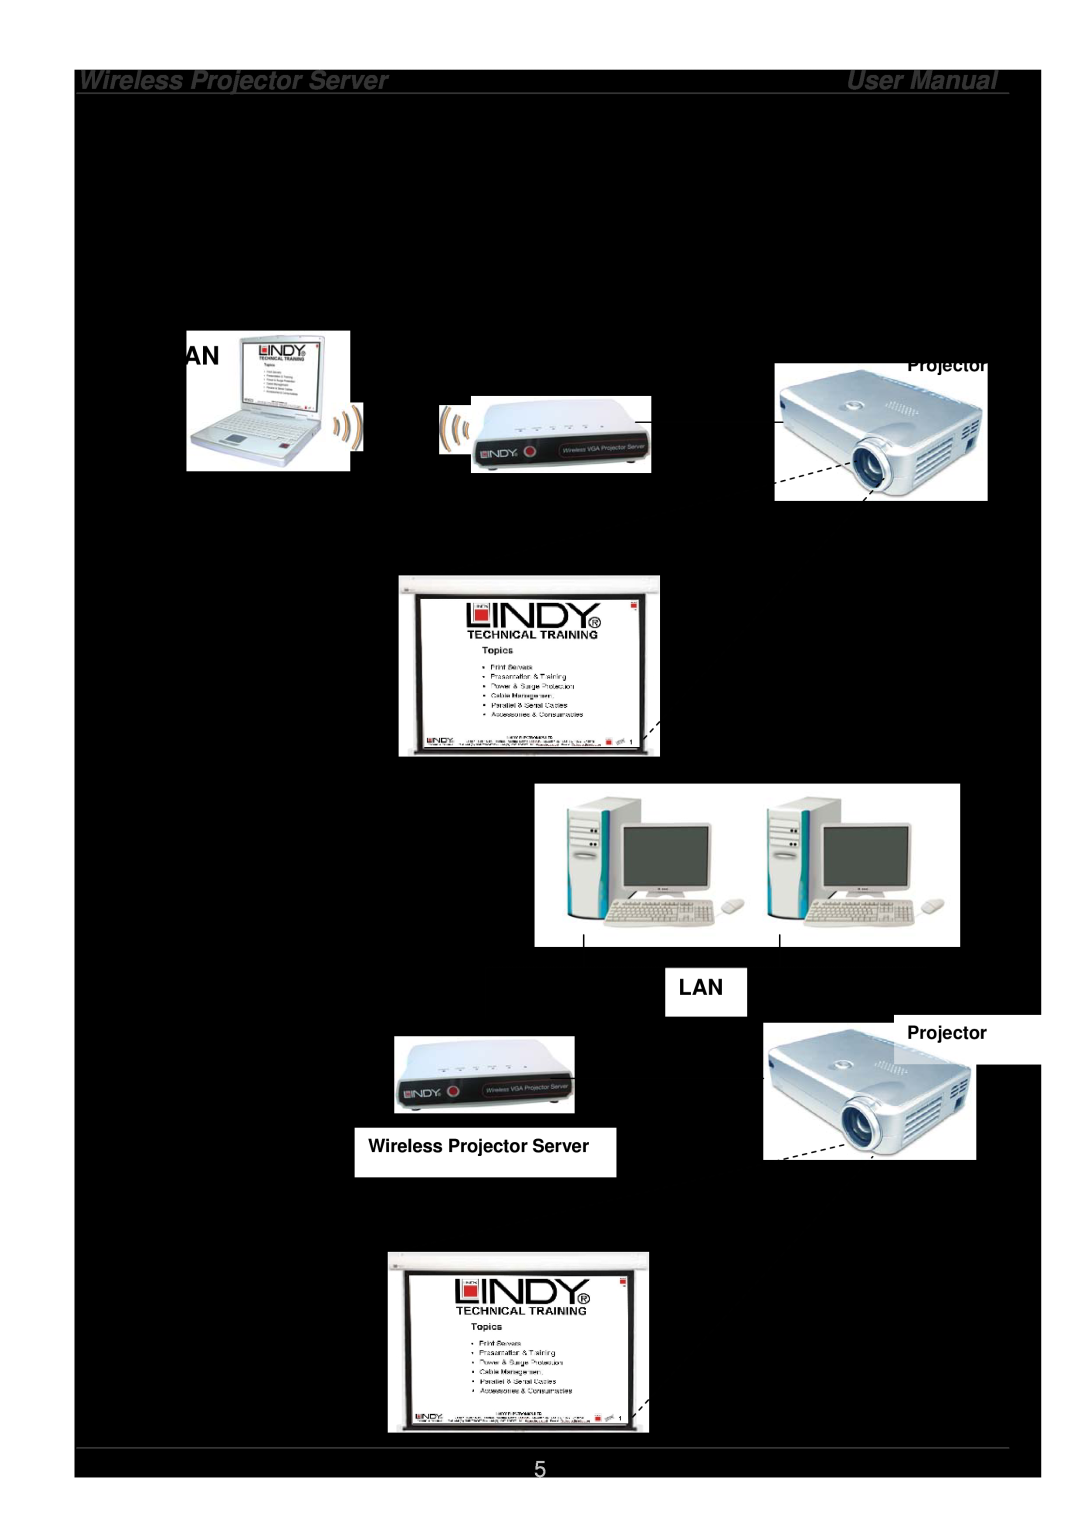 Lindy 32500 user manual Using the Wireless Projector Server, Via a WLAN, Via an Ethernet network, User Manual 